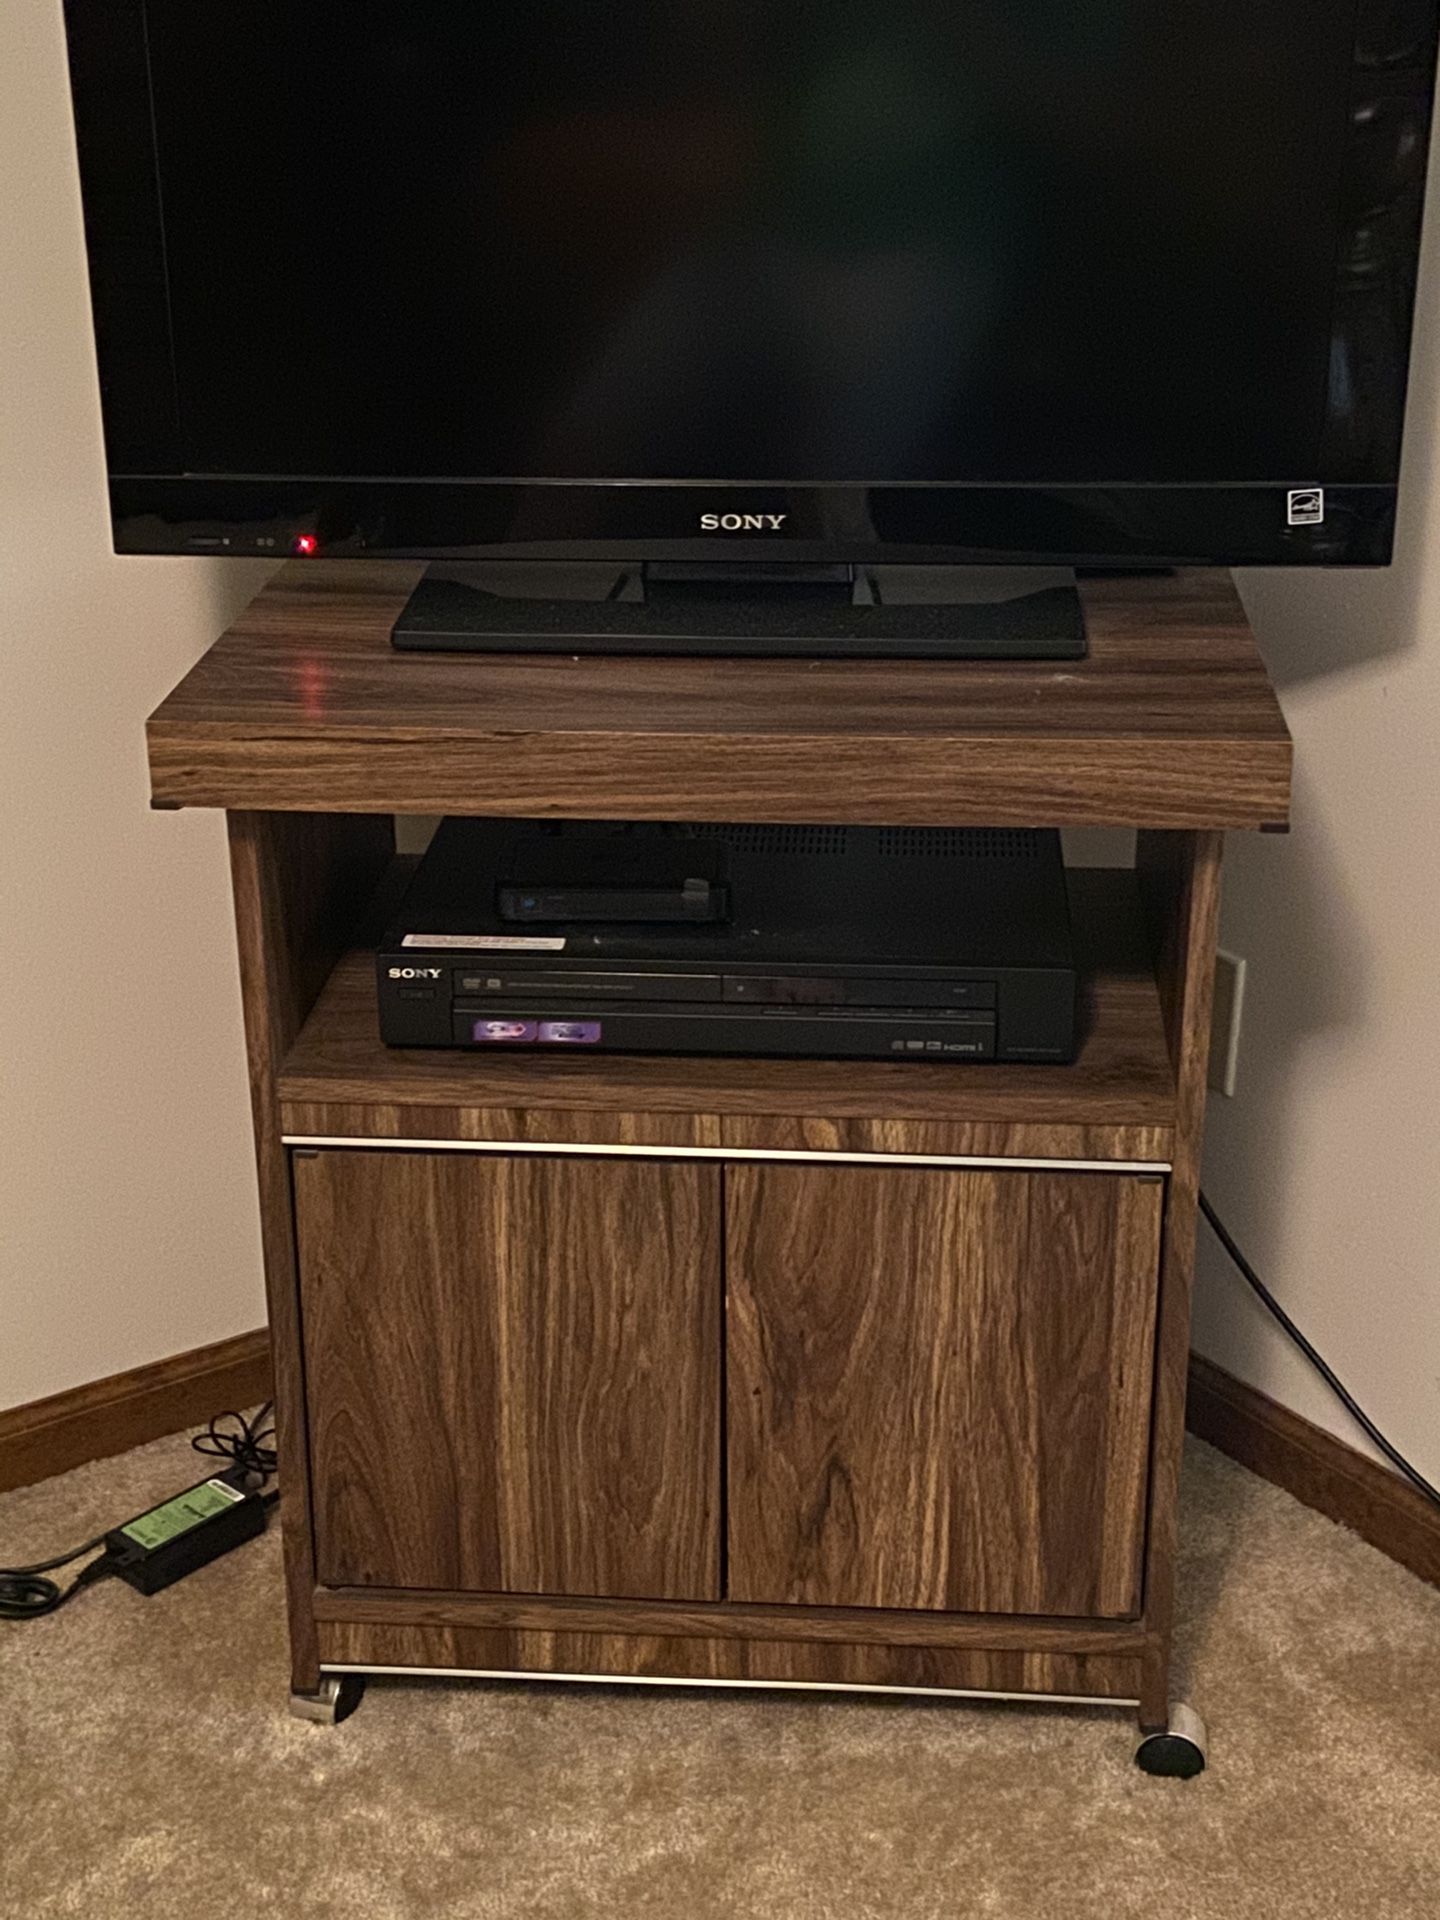 TV or microwave stand